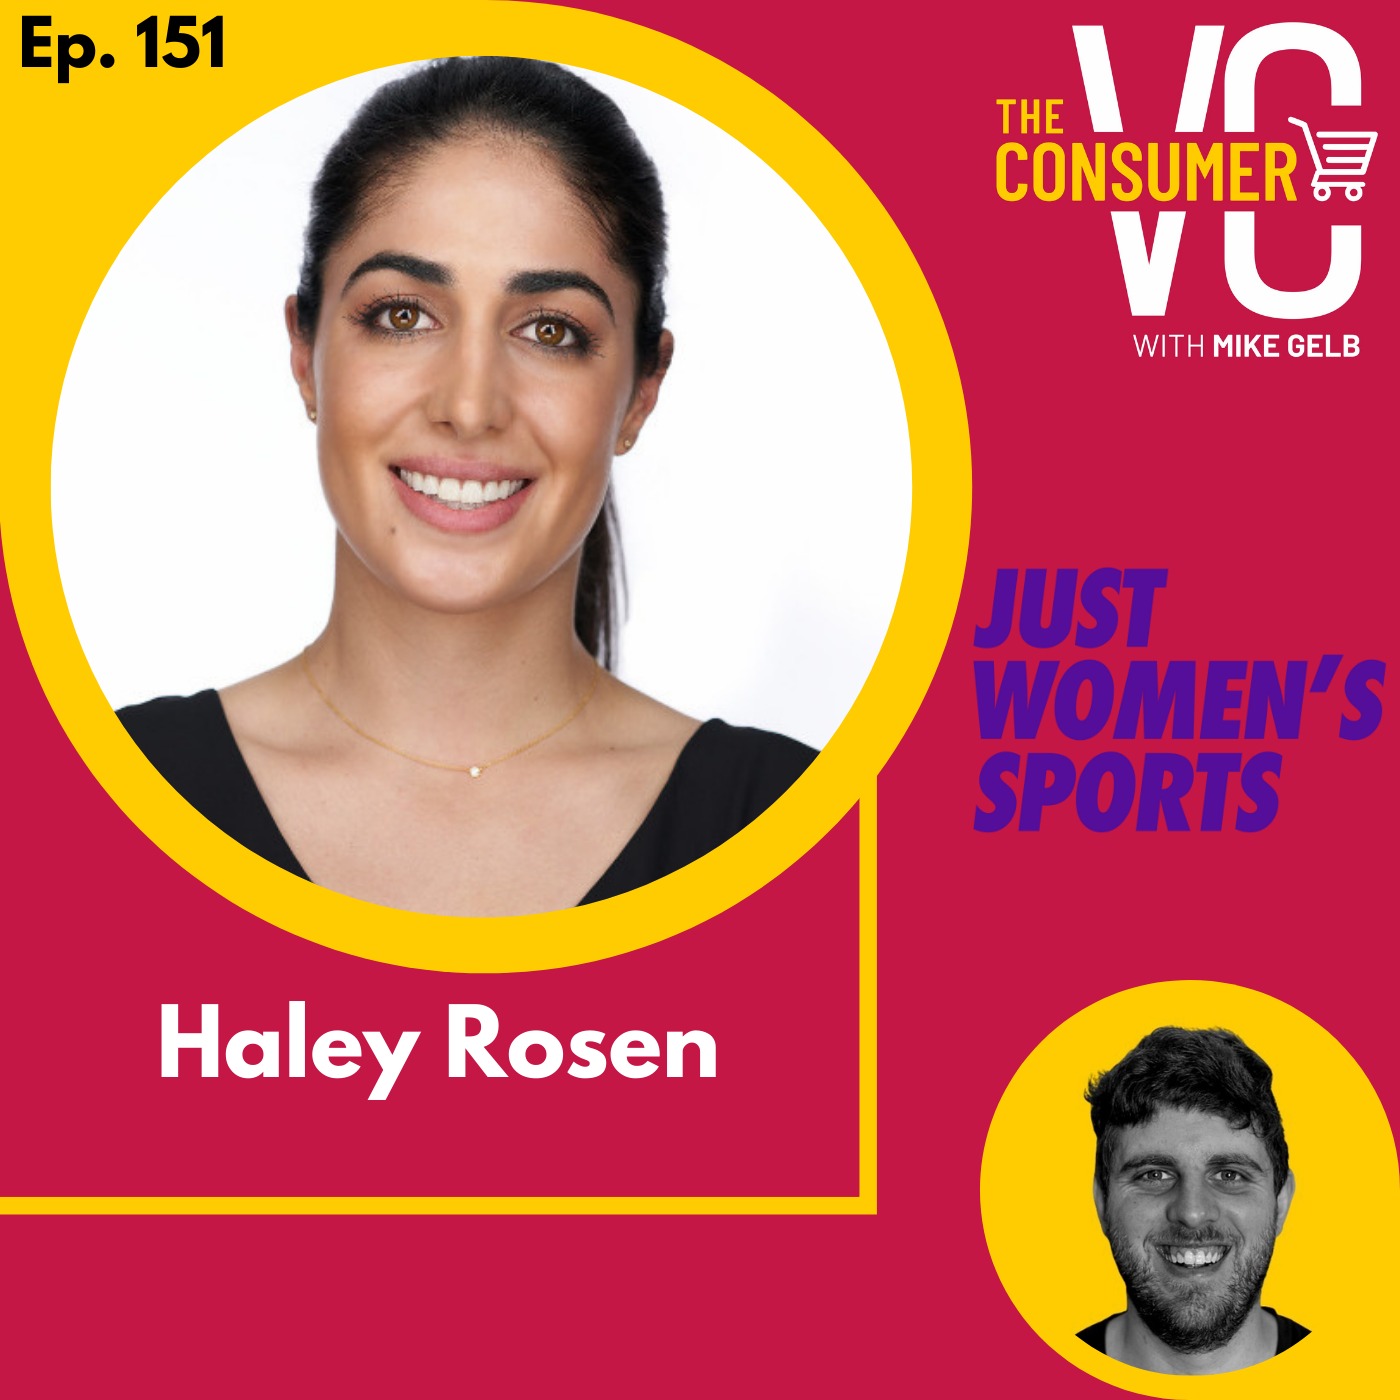 Haley Rosen (Just Women's Sports) - Starting a sports media company through the pandemic, the relationship between athlete and journalist, and why women's sports are overlooked